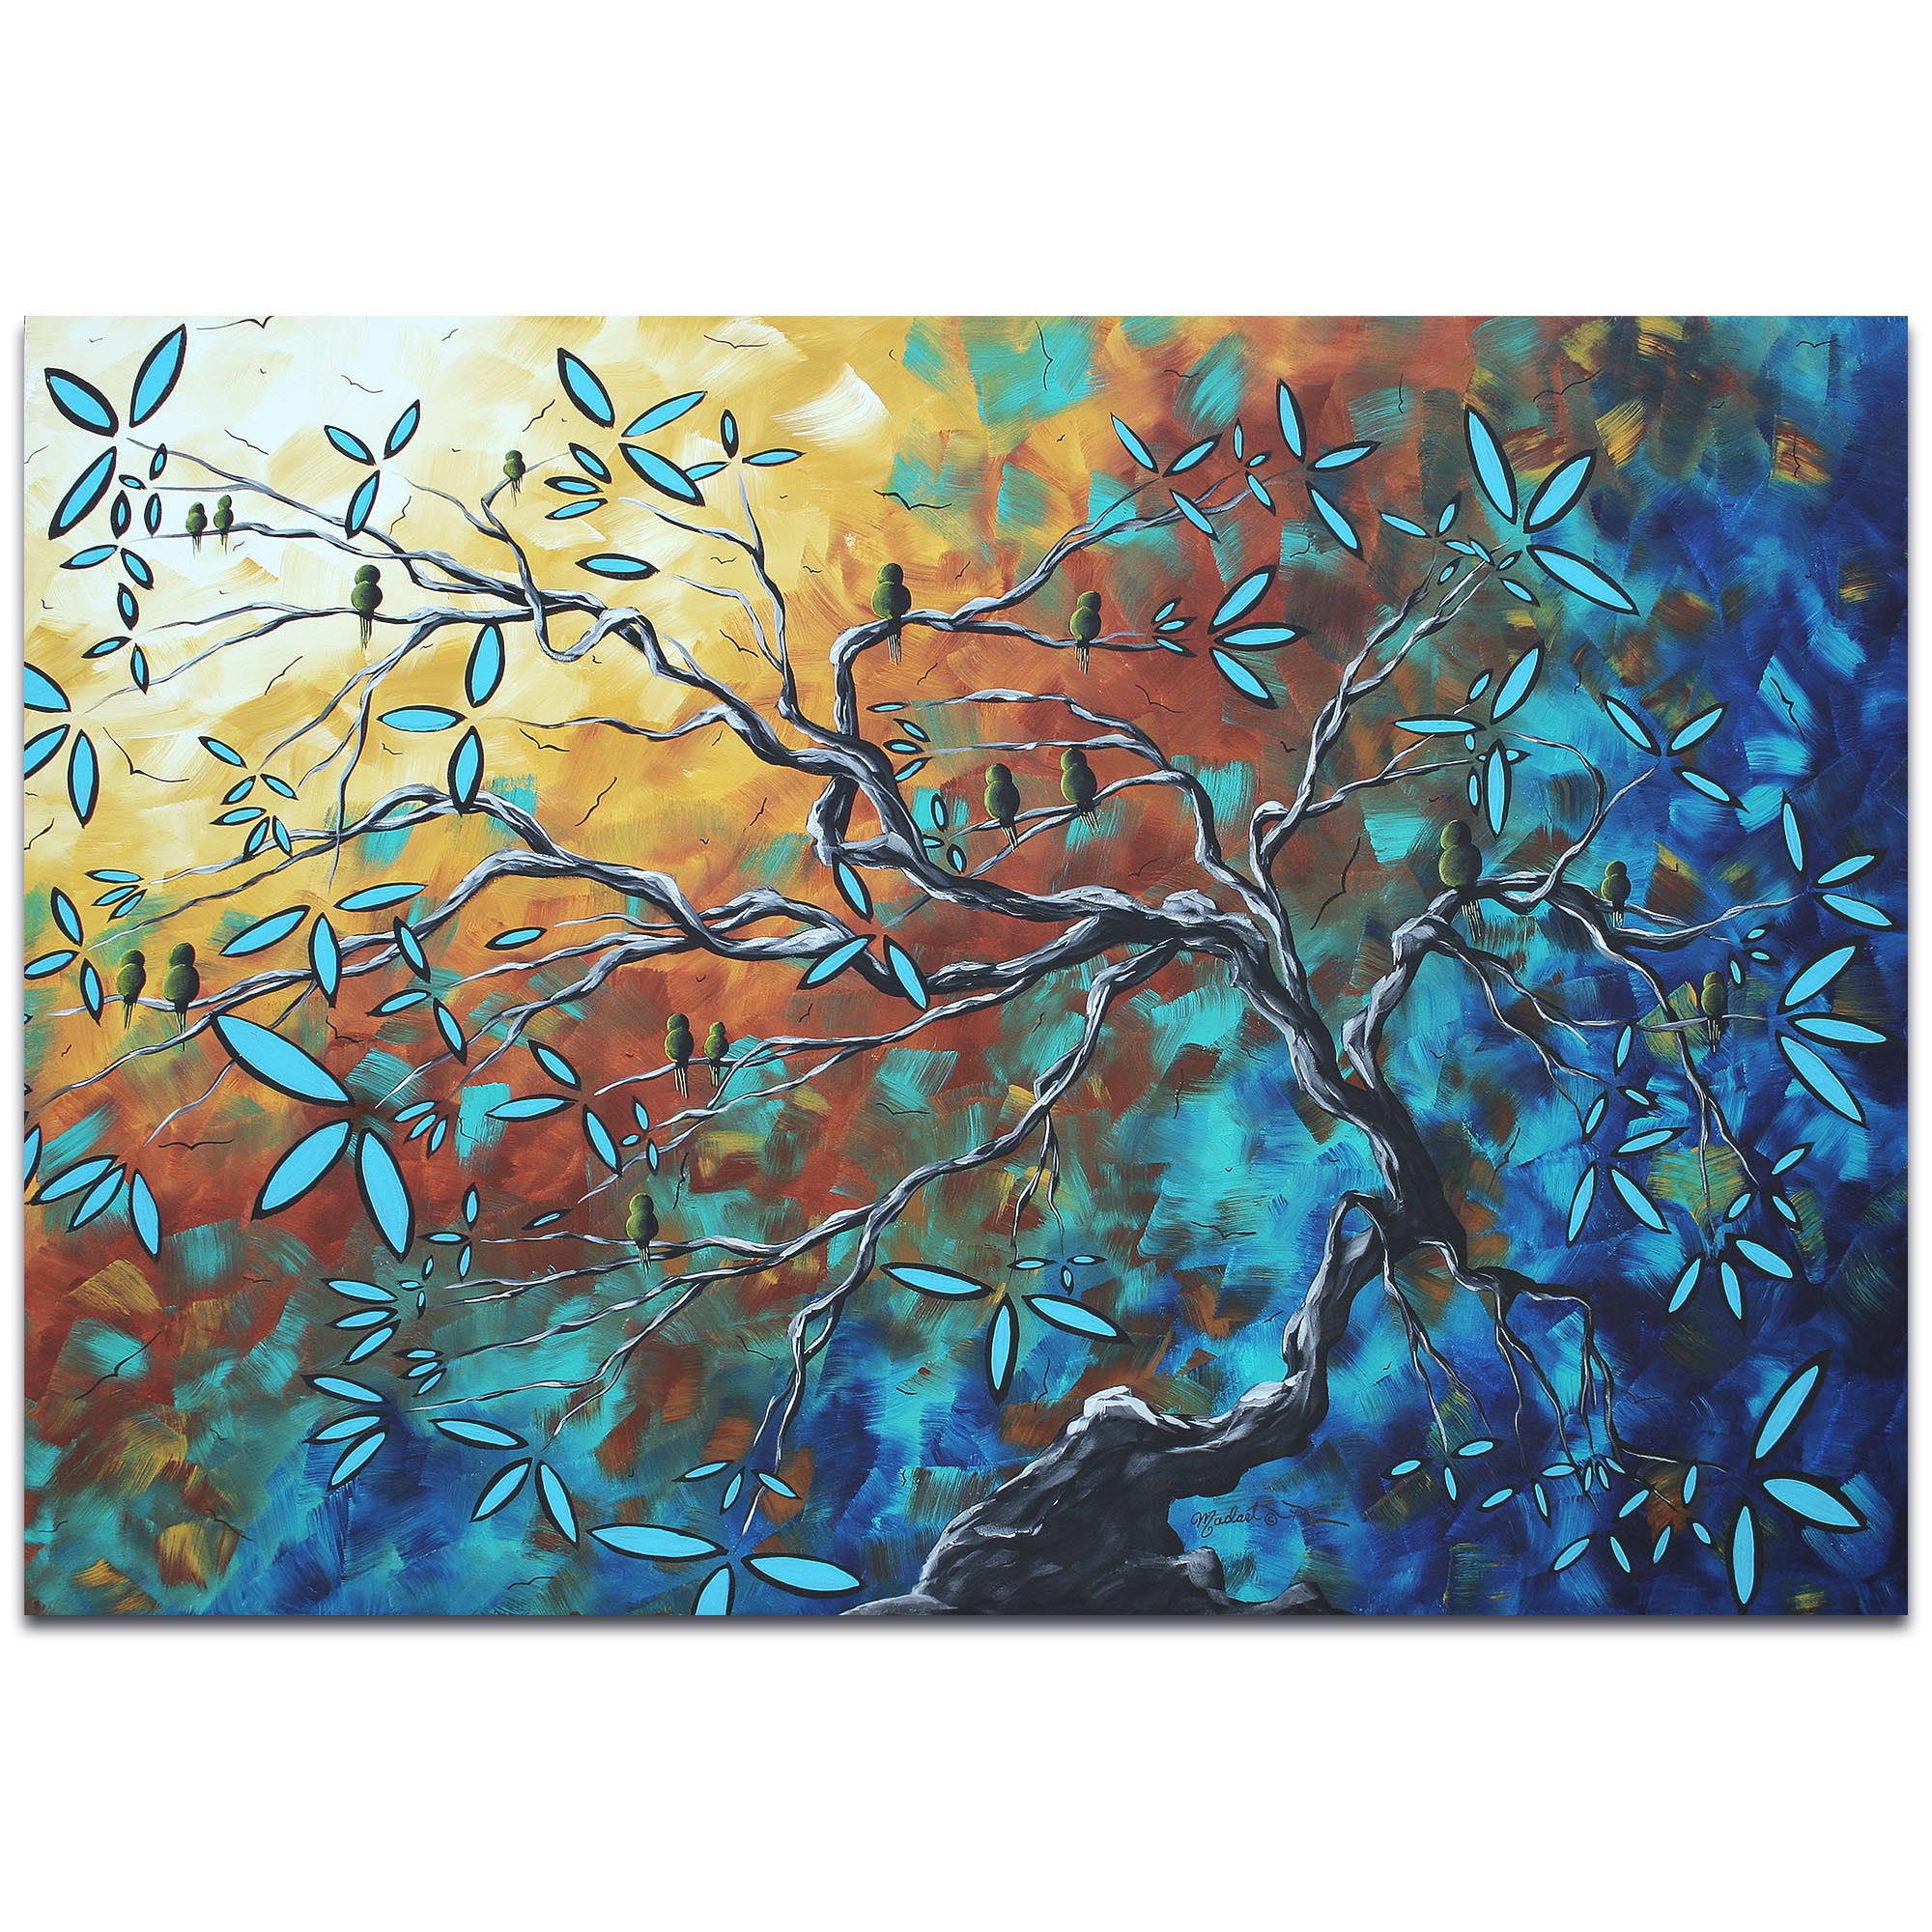 Landscape Painting 'Where the Heart Is' - Abstract Tree Art on Metal or Acrylic